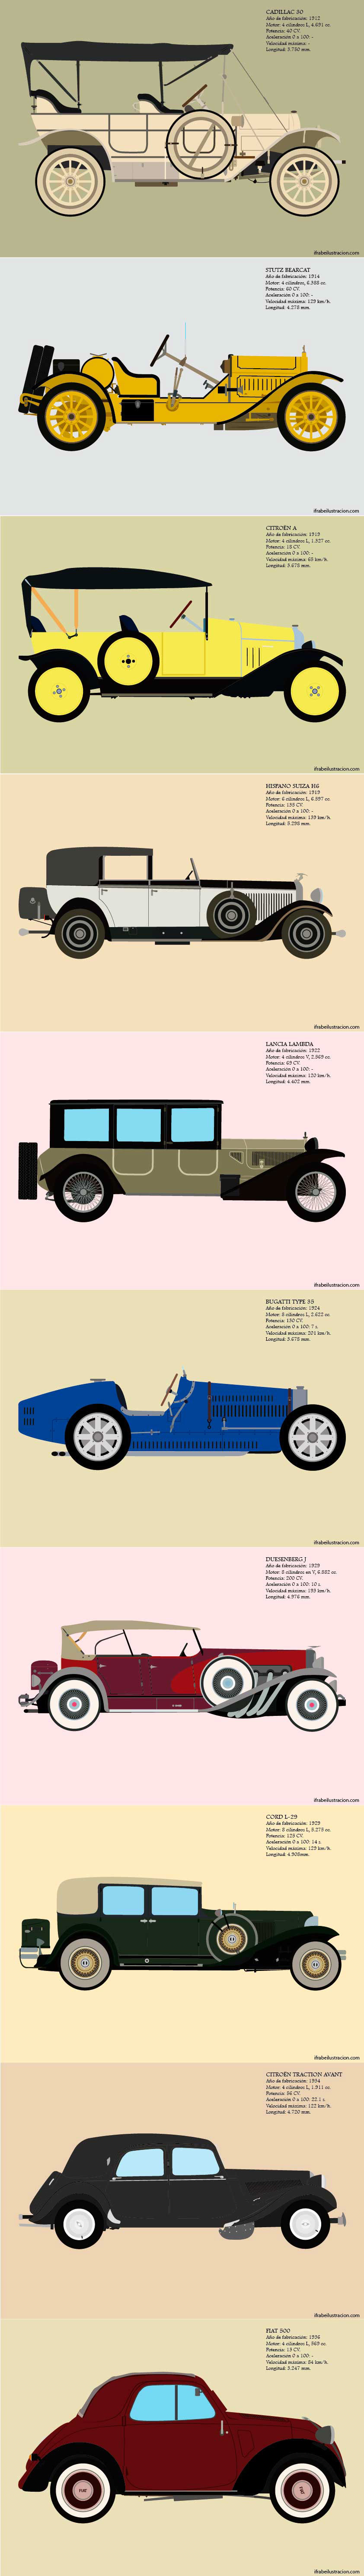 coches Cars automoviles vector automotive   history